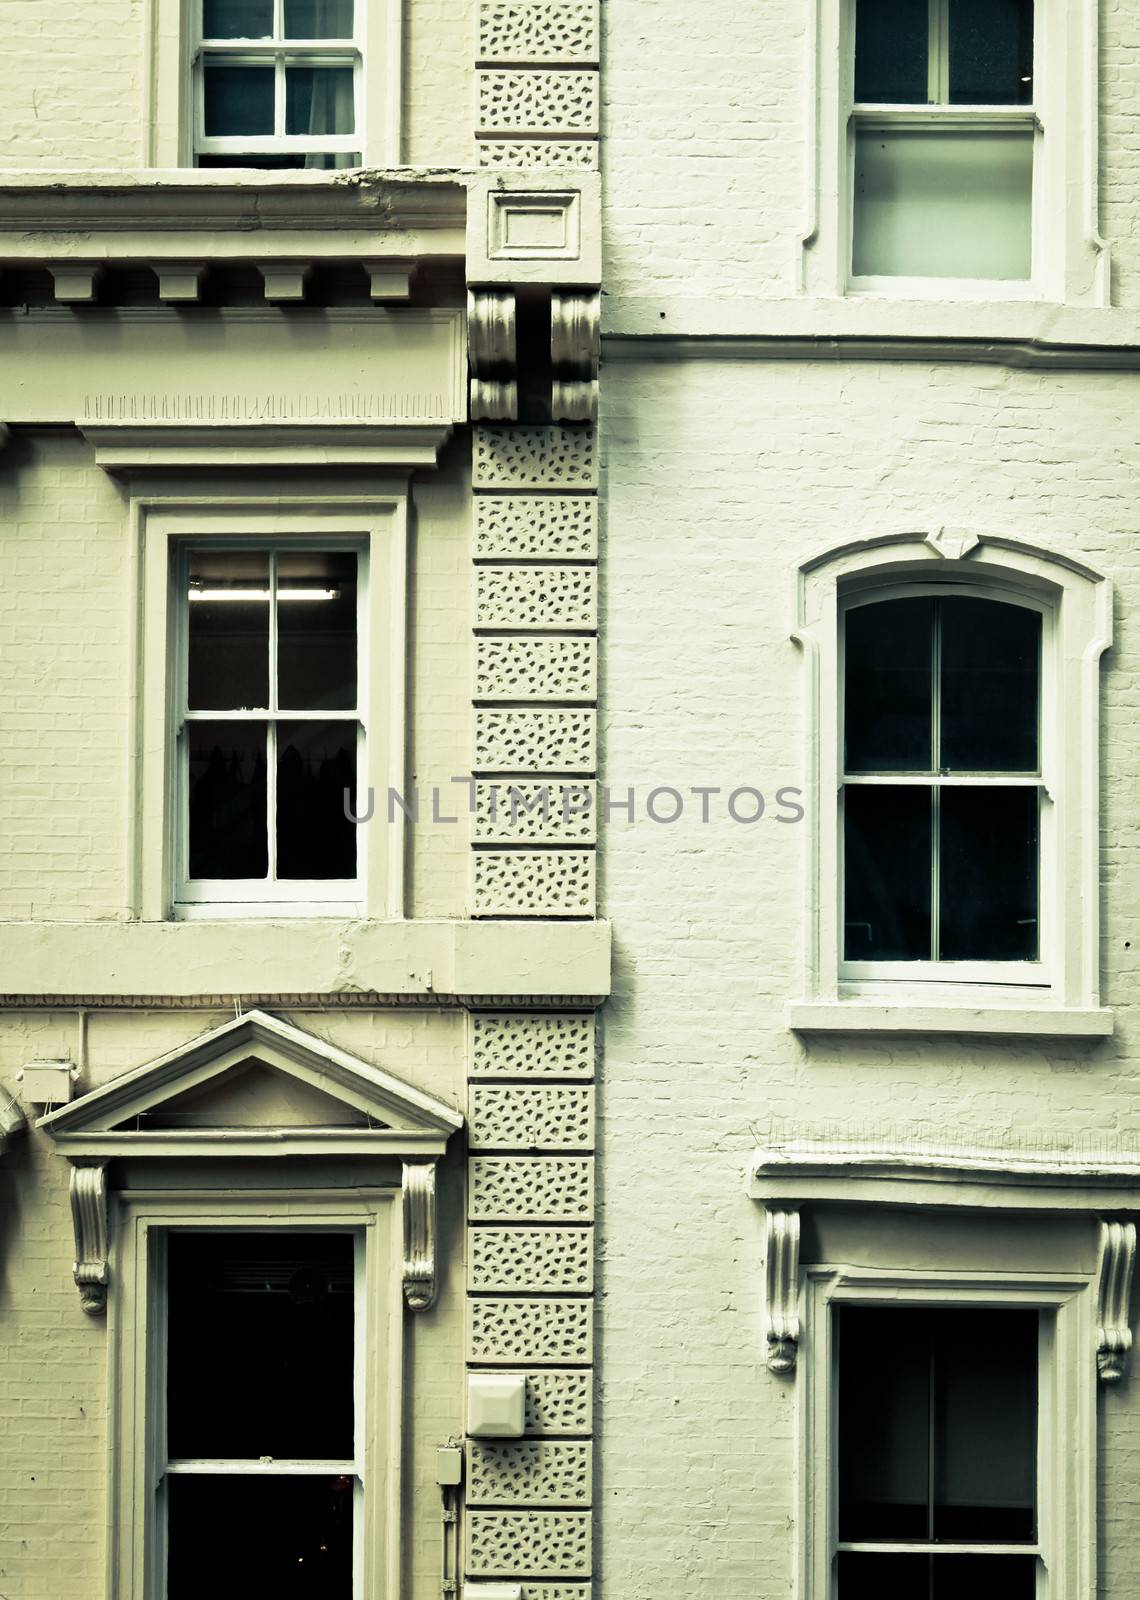 Neighbouring three storey town houses in London